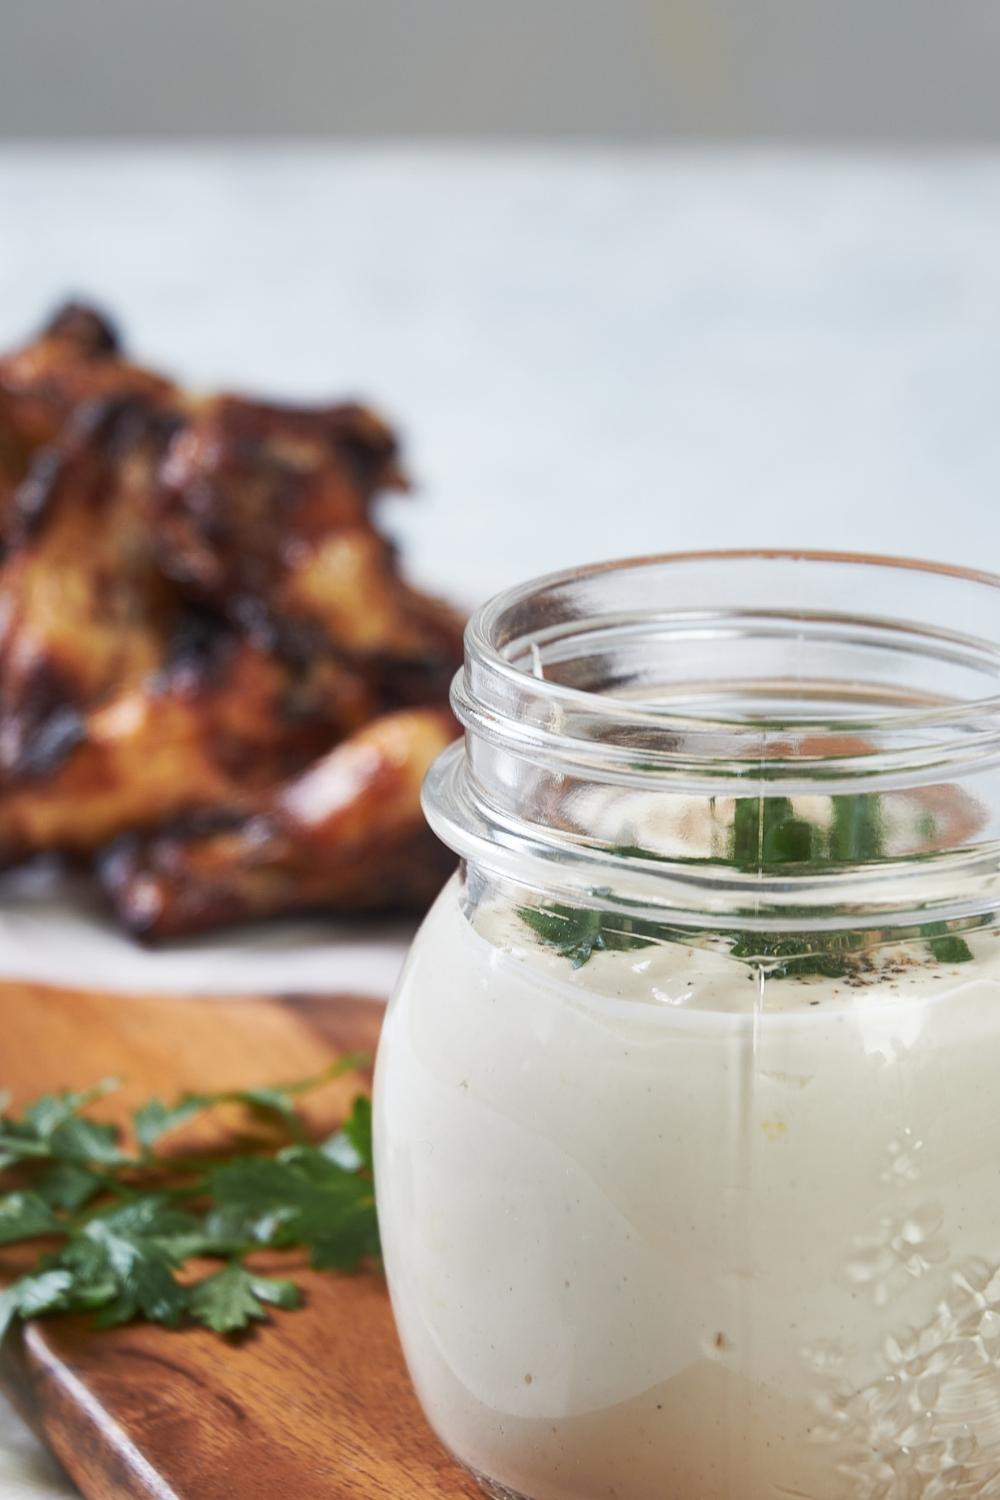 A small mason jar with homemade Alabama white sauce in it. The jar is sitting on a cutting board, and there are chicken wings on the other side of the same cutting board.